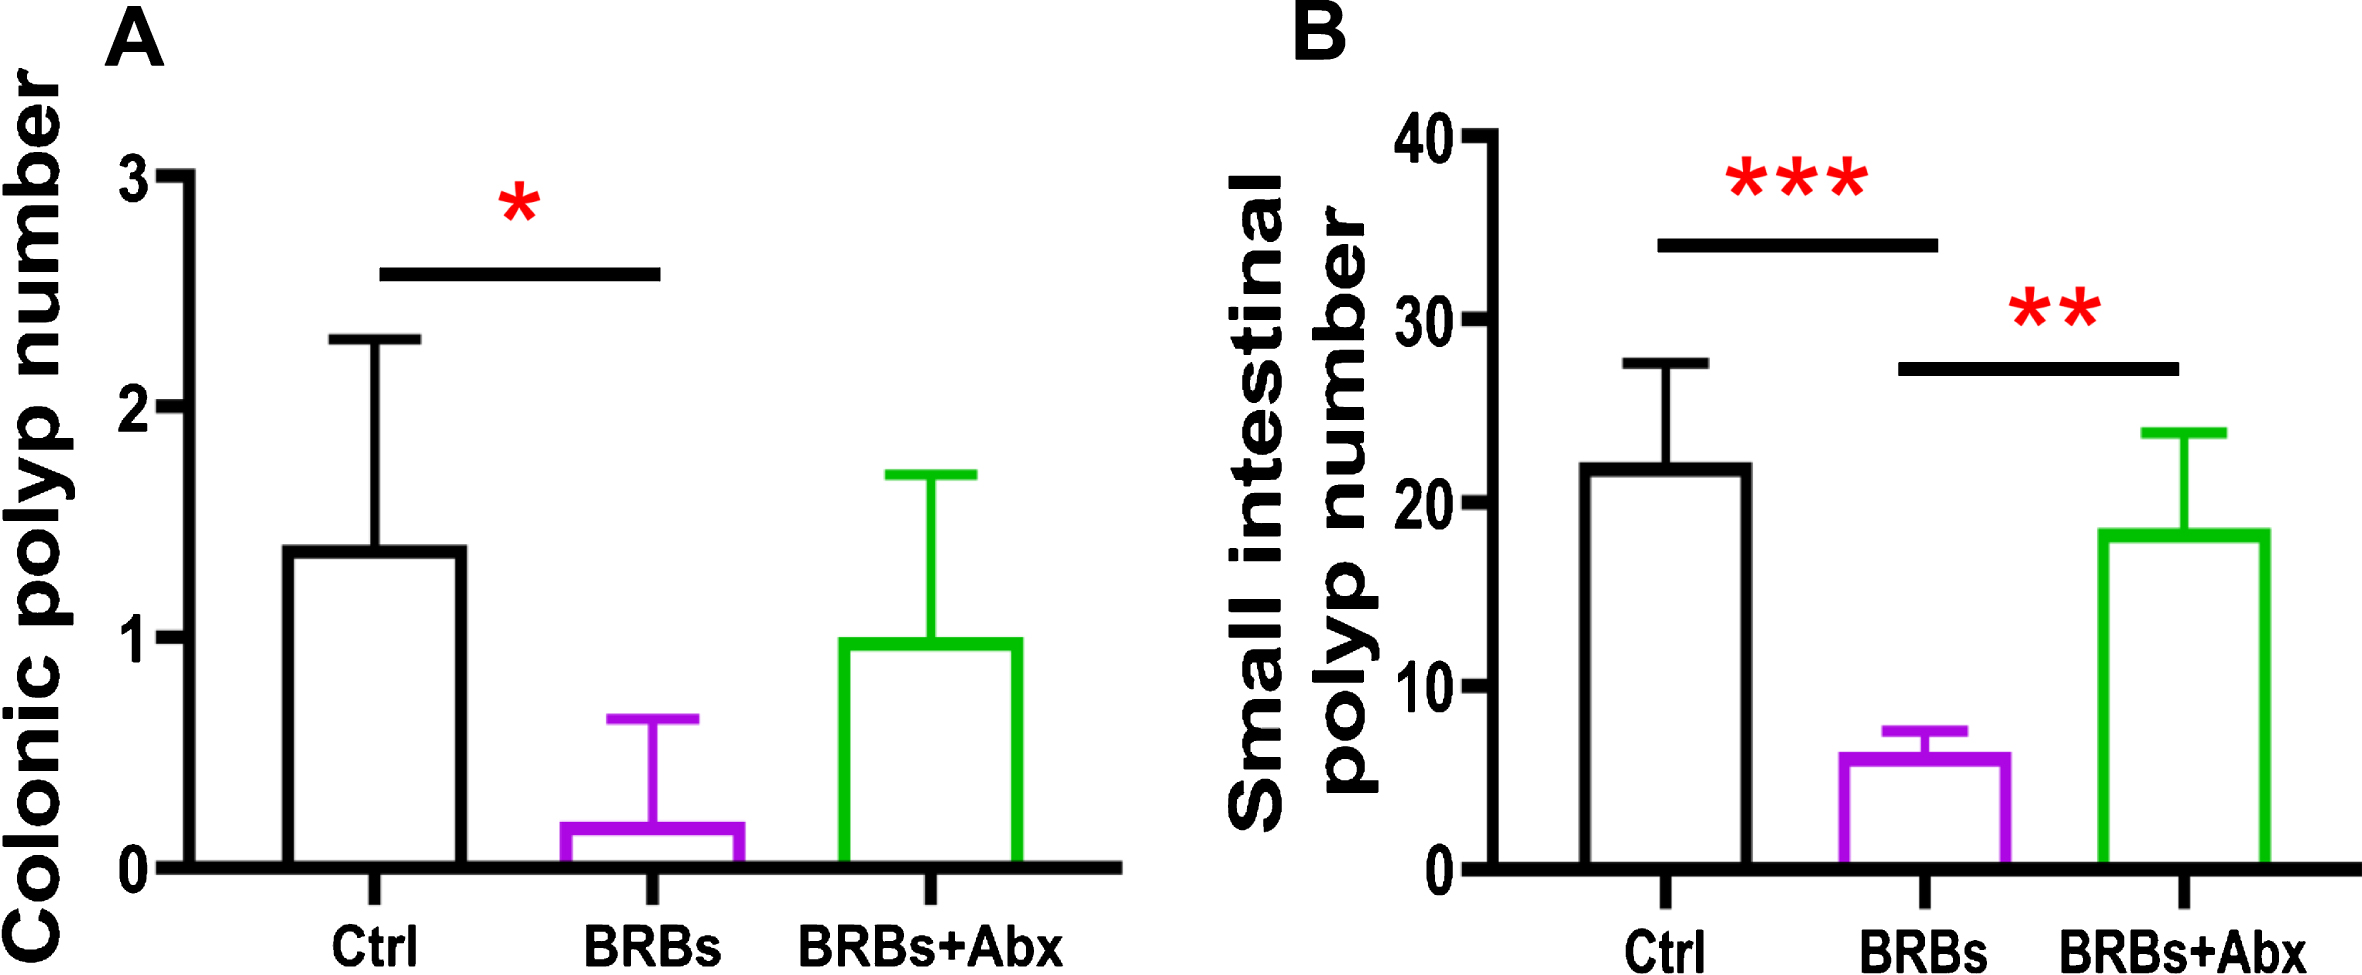 Gut bacteria are required for the benefits of BRBs in ApcMin/+ mice. BRBs significantly decreased the number of polyps in colon (A) and small intestine (B) of ApcMin/+ mice, but antibiotics abolished those BRB-mediated chemoprotective effects. Ctrl: control diet; Abx: antibiotics. n = 5 per group; * p < 0.05; ** p < 0.01; *** p < 0.001.